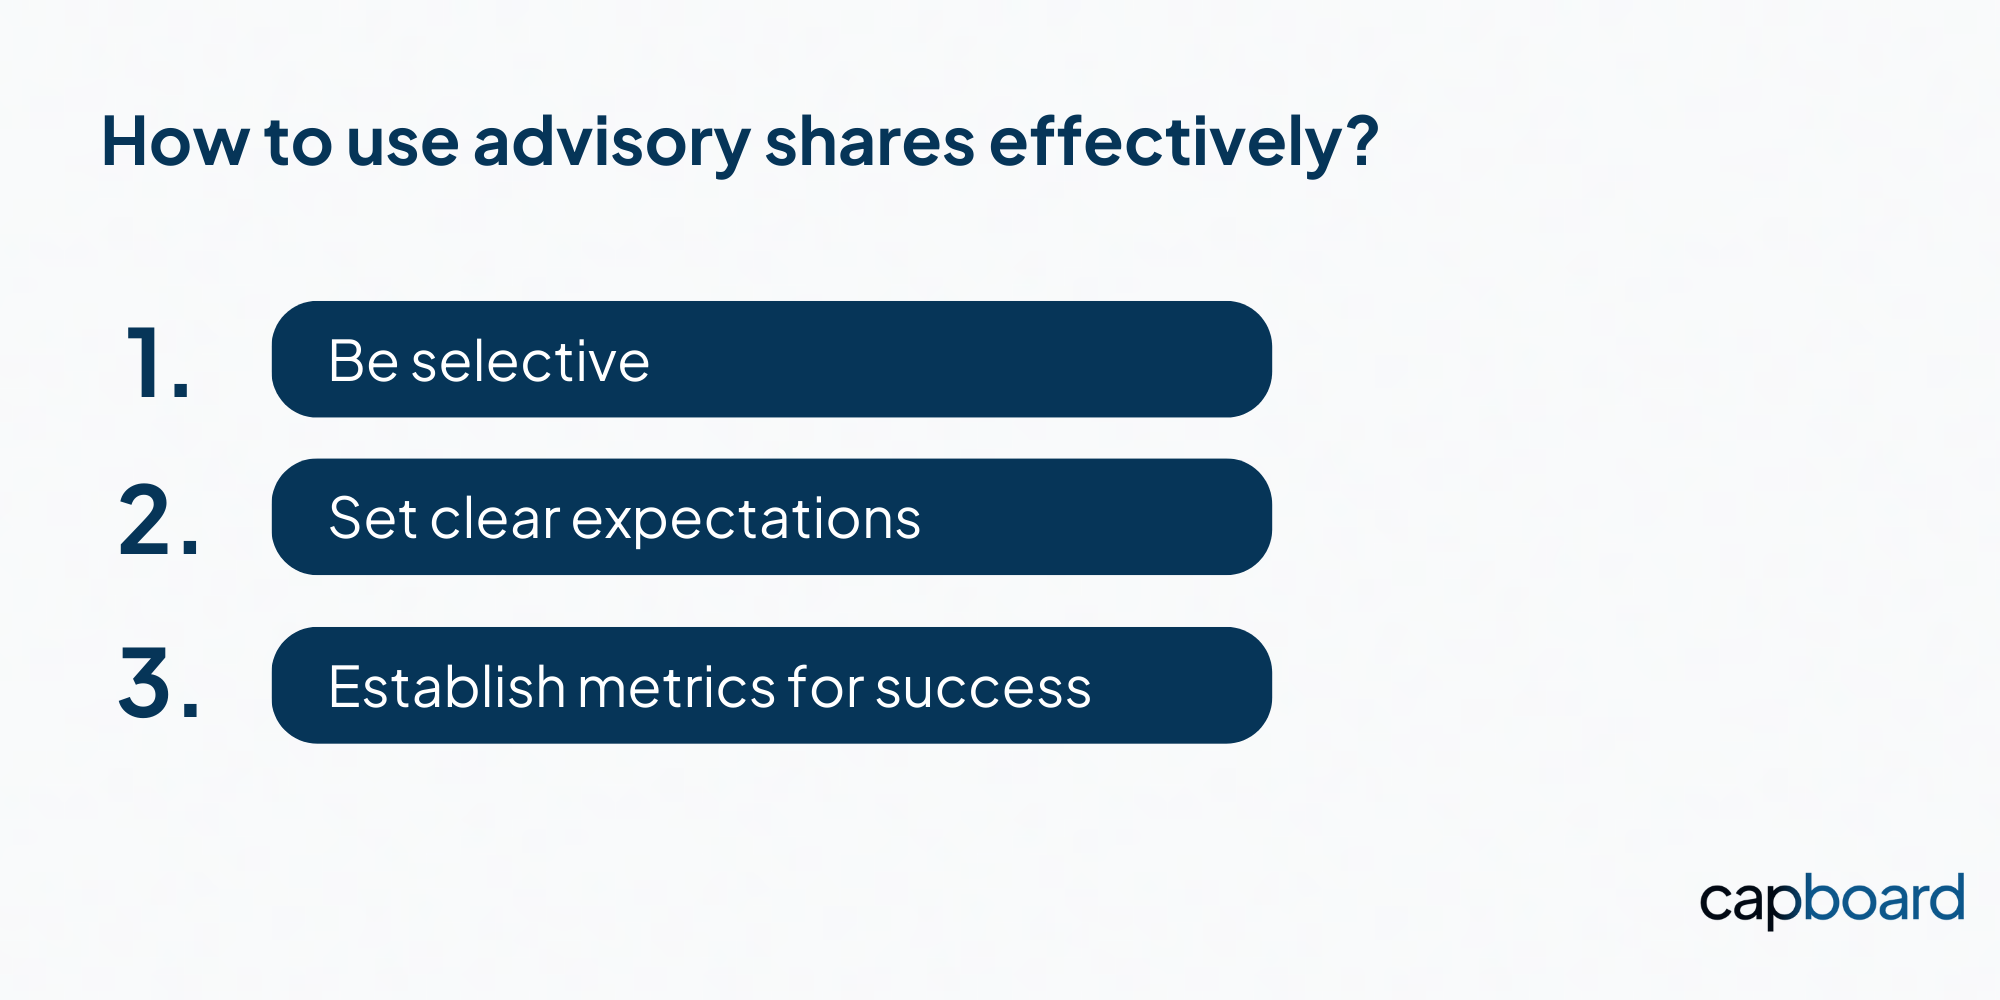 3 tips on how to use advisory shares effectively: be selective, set clear expectations and establish metrics for success of advisors.